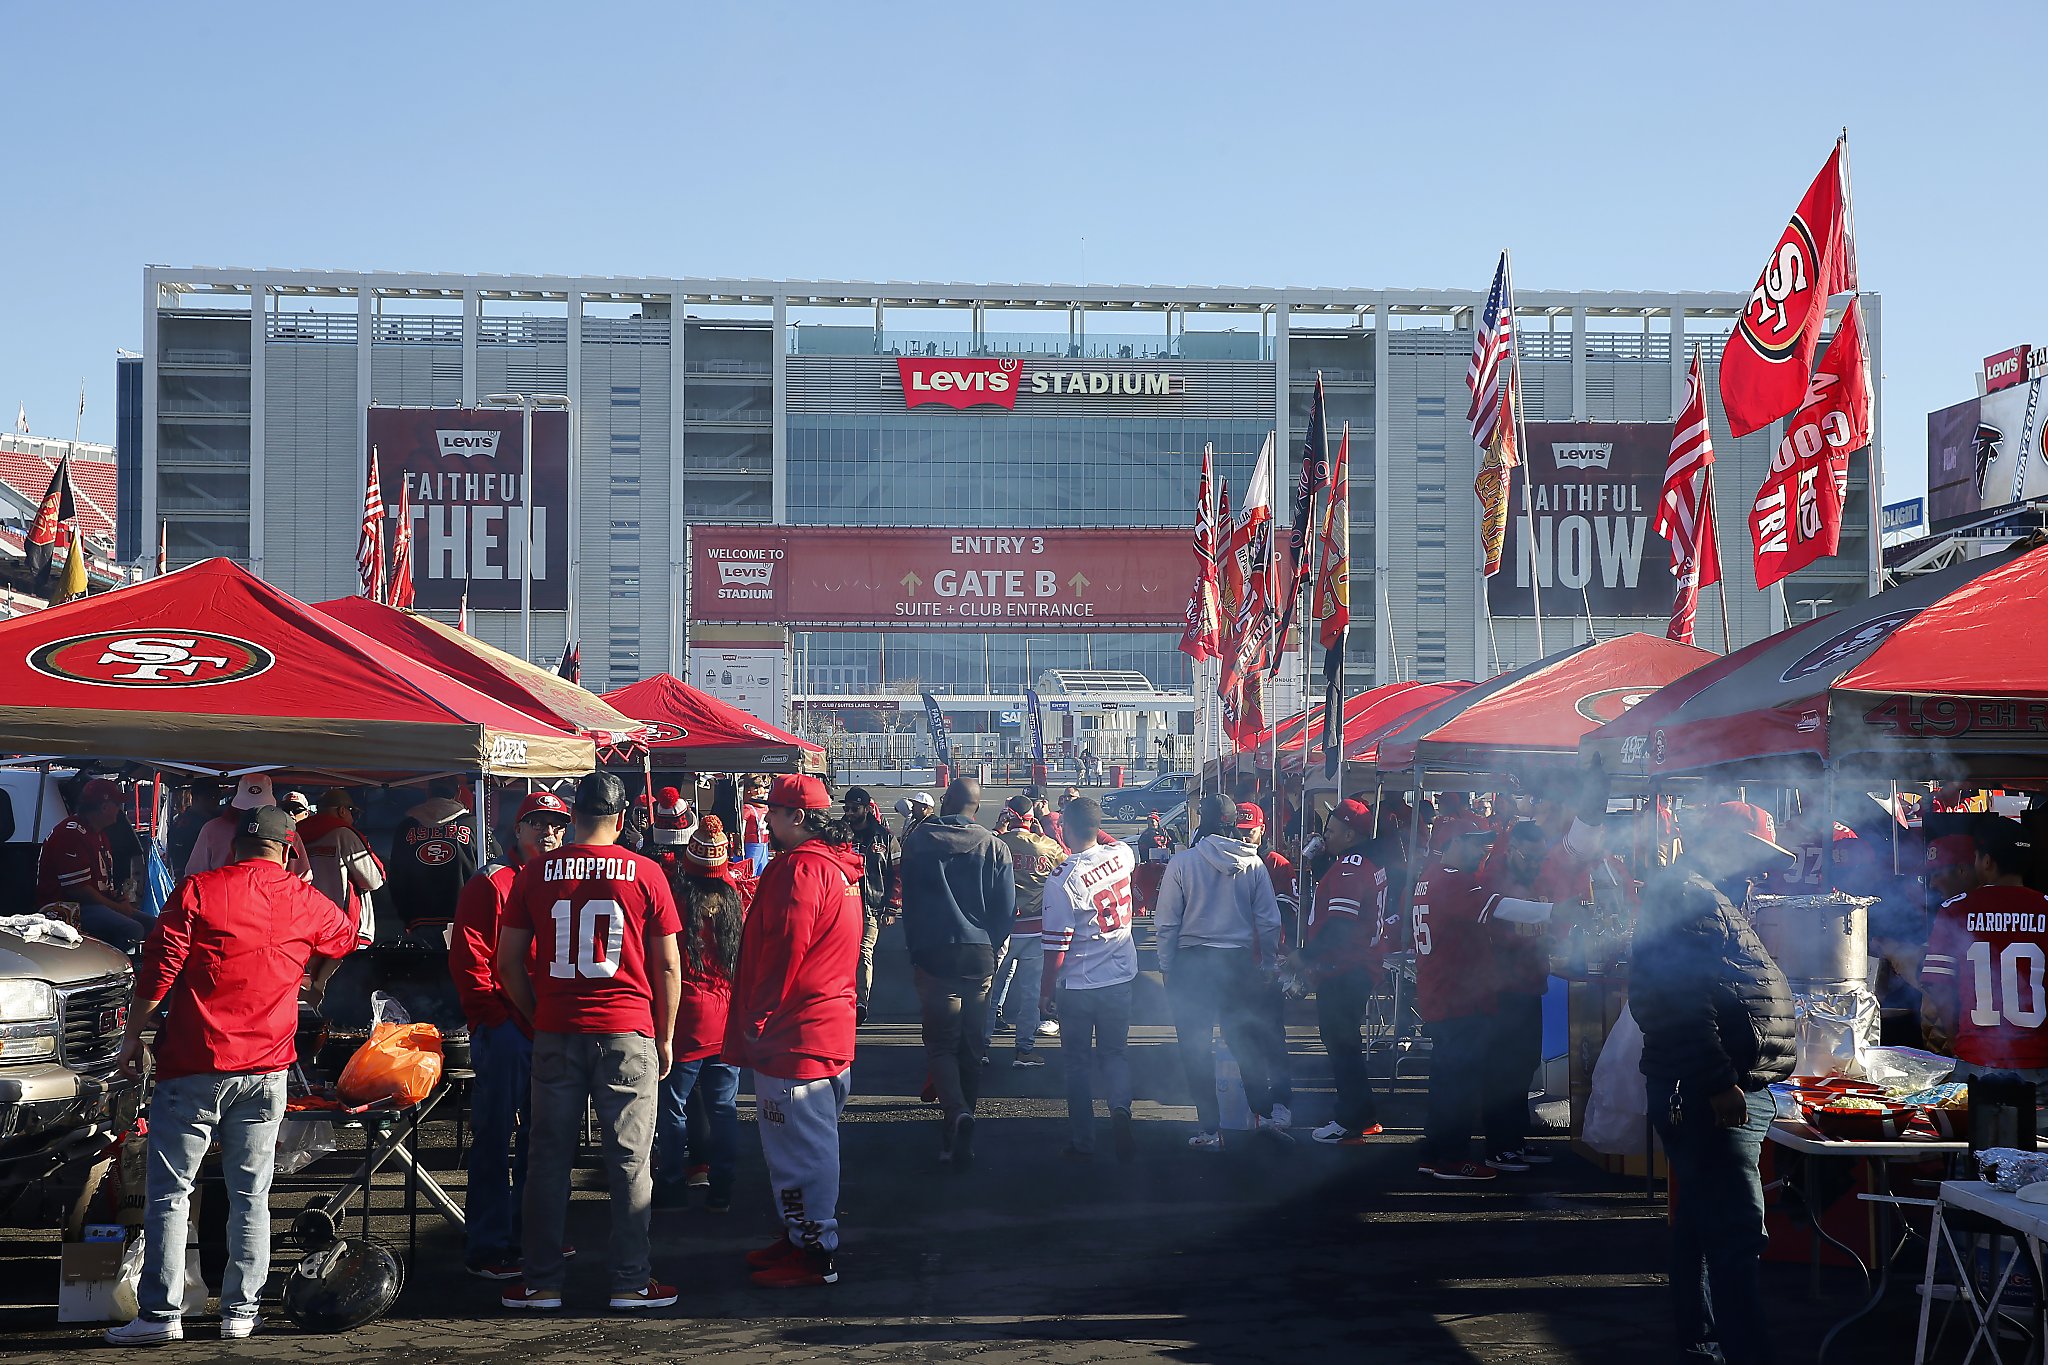 49ers vs. Vikings: Who, what, when, where and how do I get there?